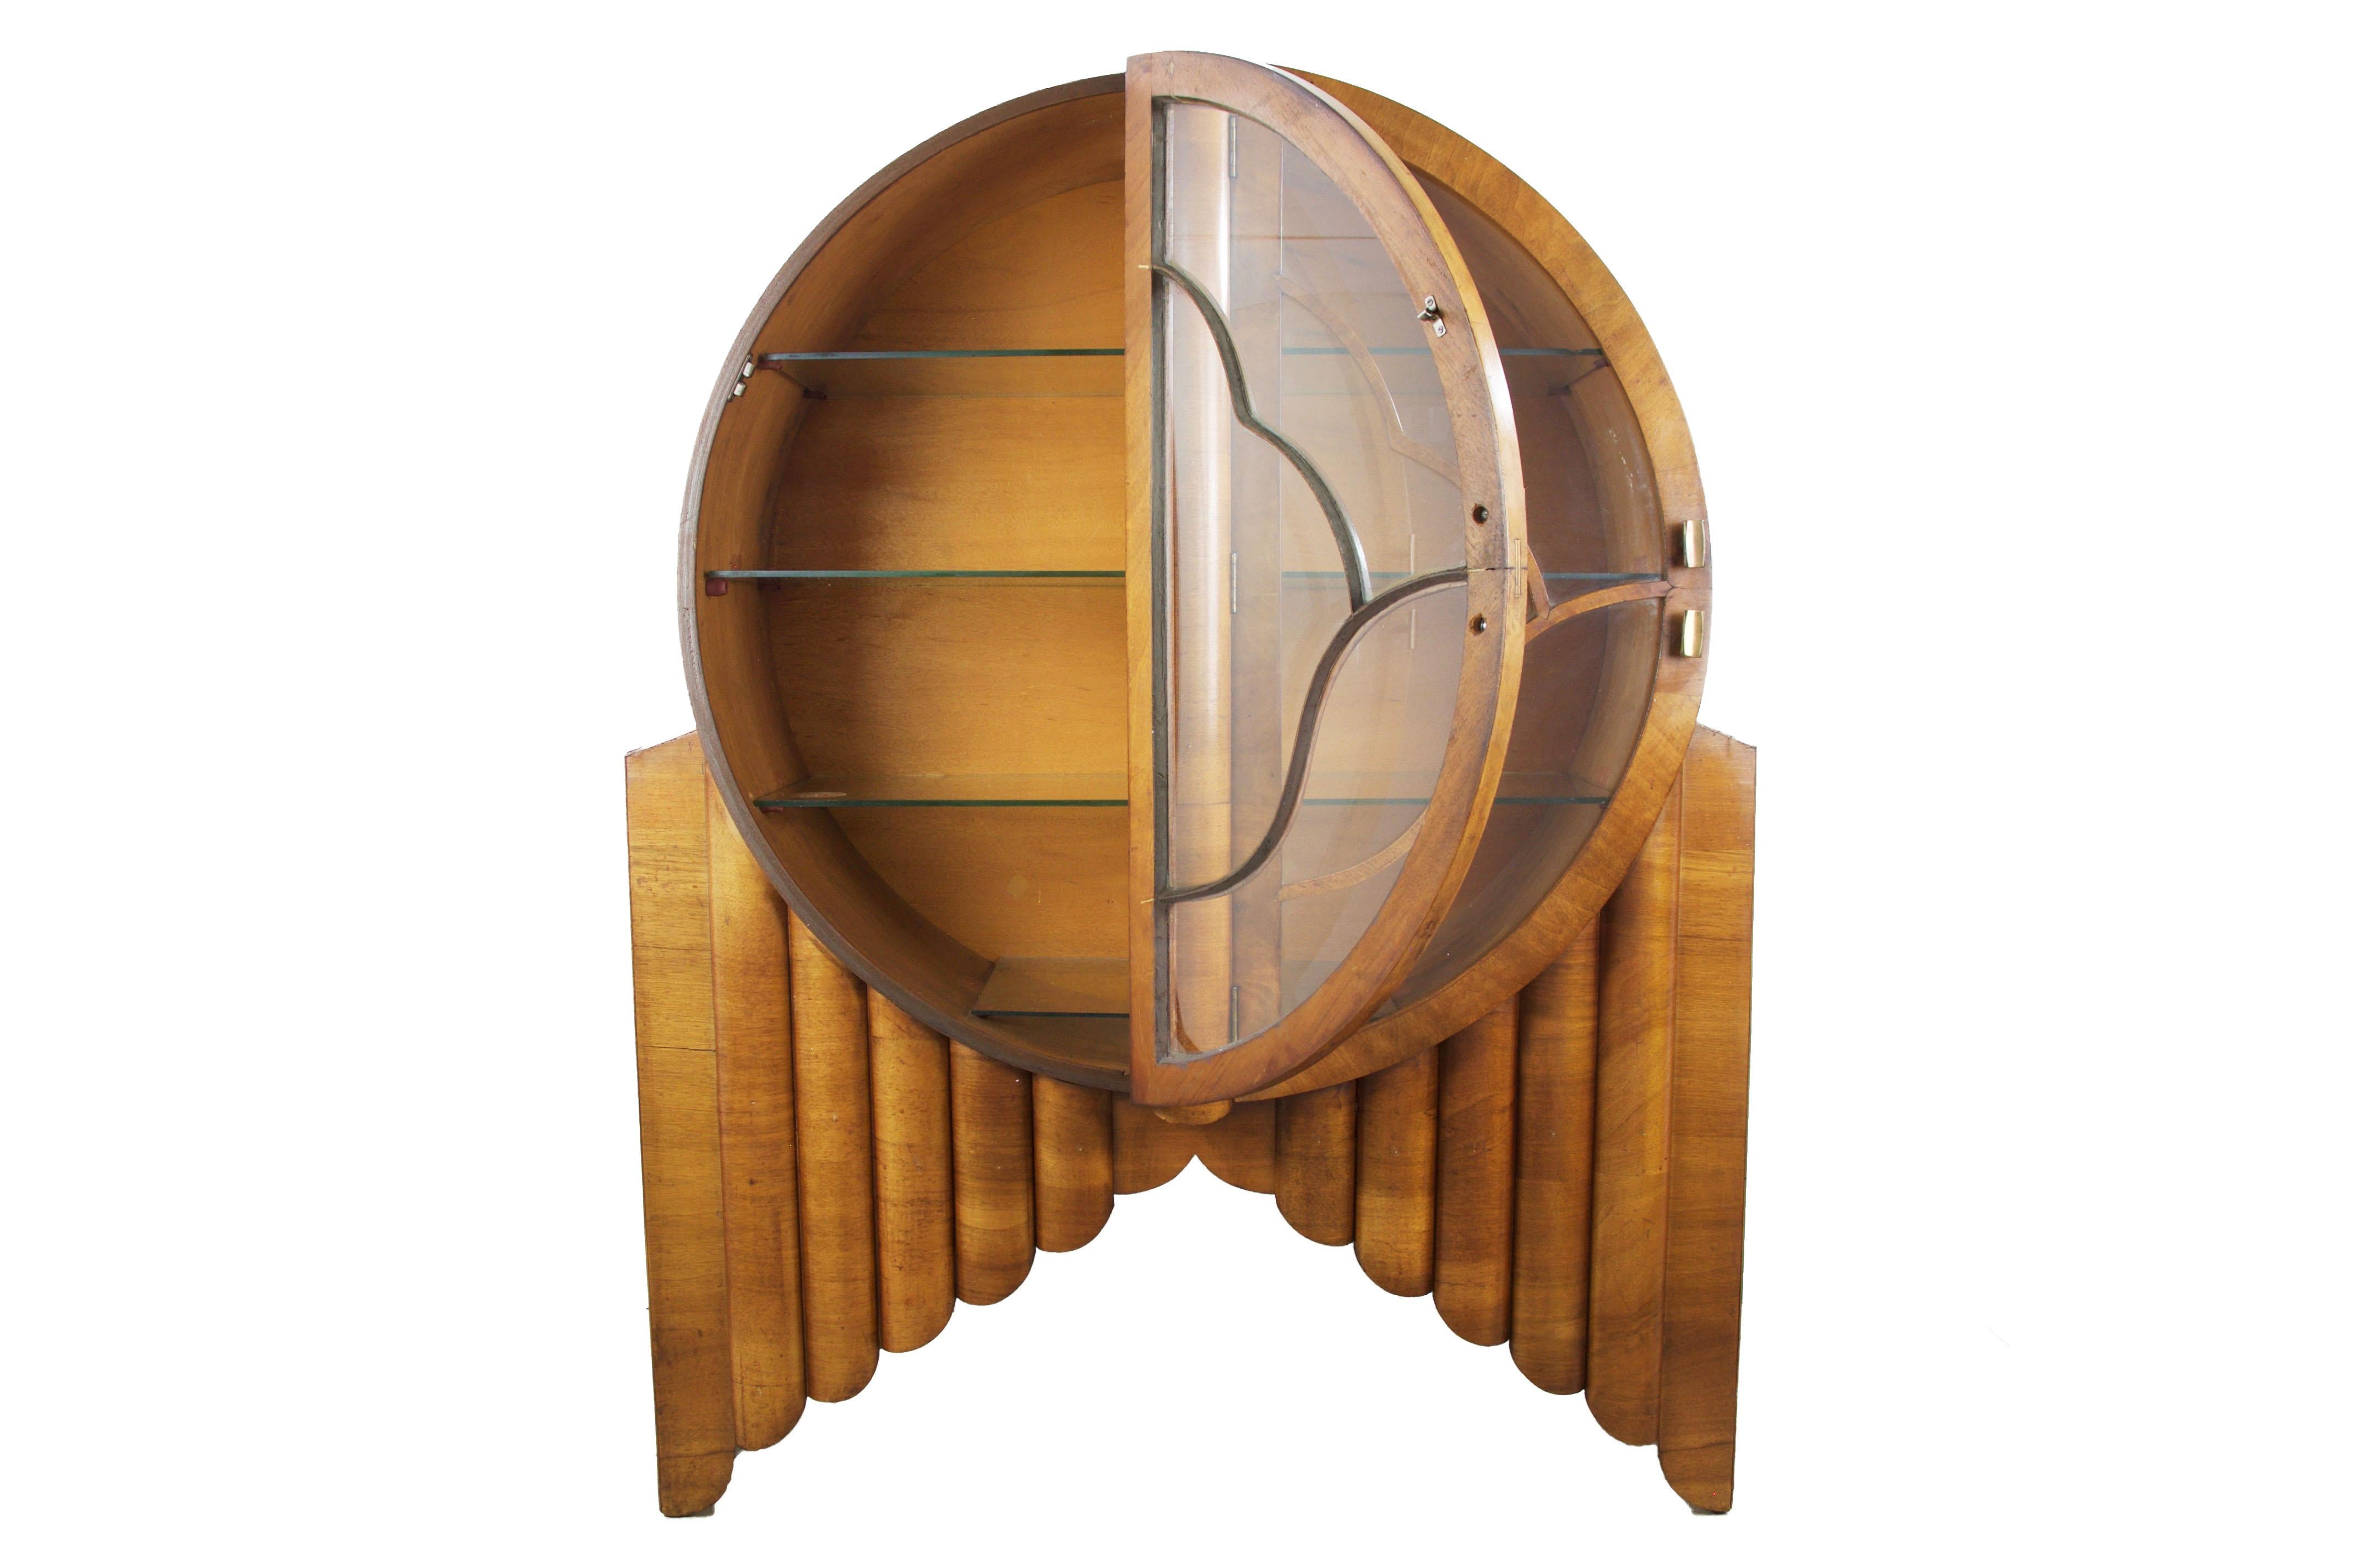 This is the sought-after Art Deco 'Rocket' Cabinet Display Vitrine, English, circa 1930.
Figured walnut with six graduated tubular-shaped columns on each side representing a rocket launch and the doors glazed separately in the form of stylized